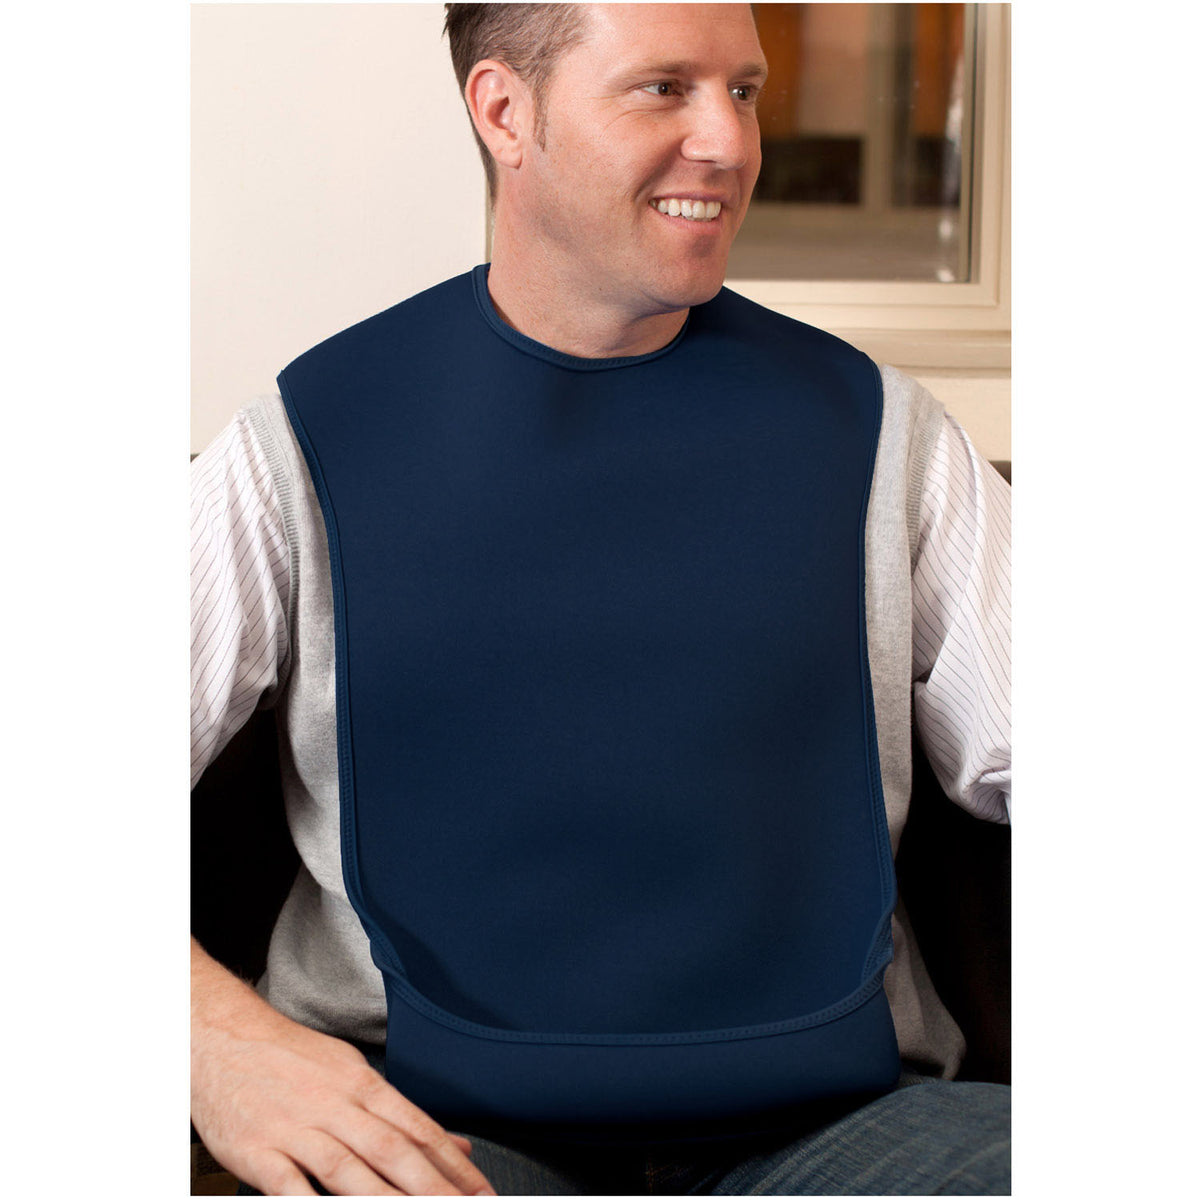 Tabard style adult bib - Small Navy | Health Care | Care Designs